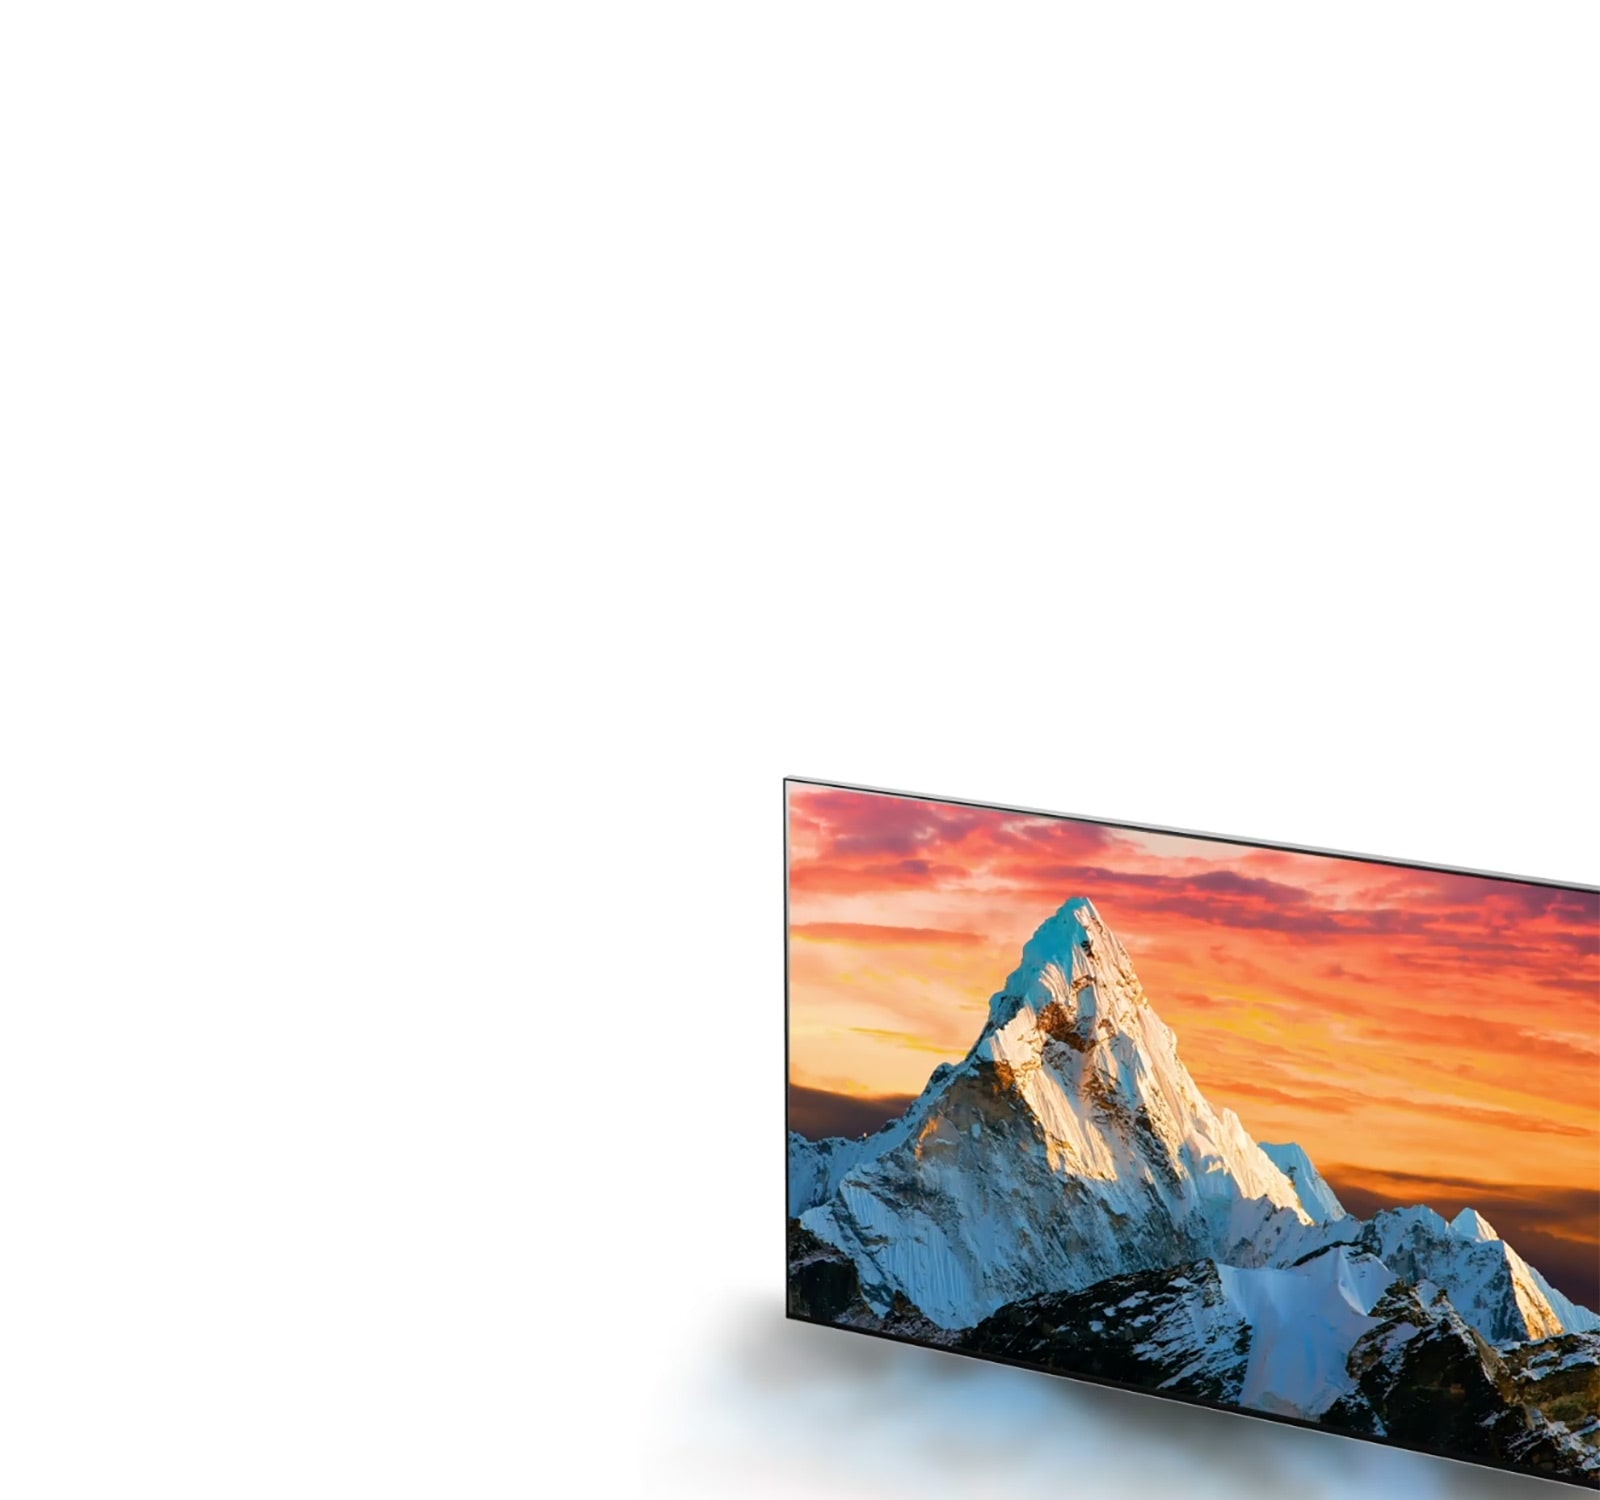 A TV screen showing a mountain against an orange sunset becomes larger making details clearer (play the video).